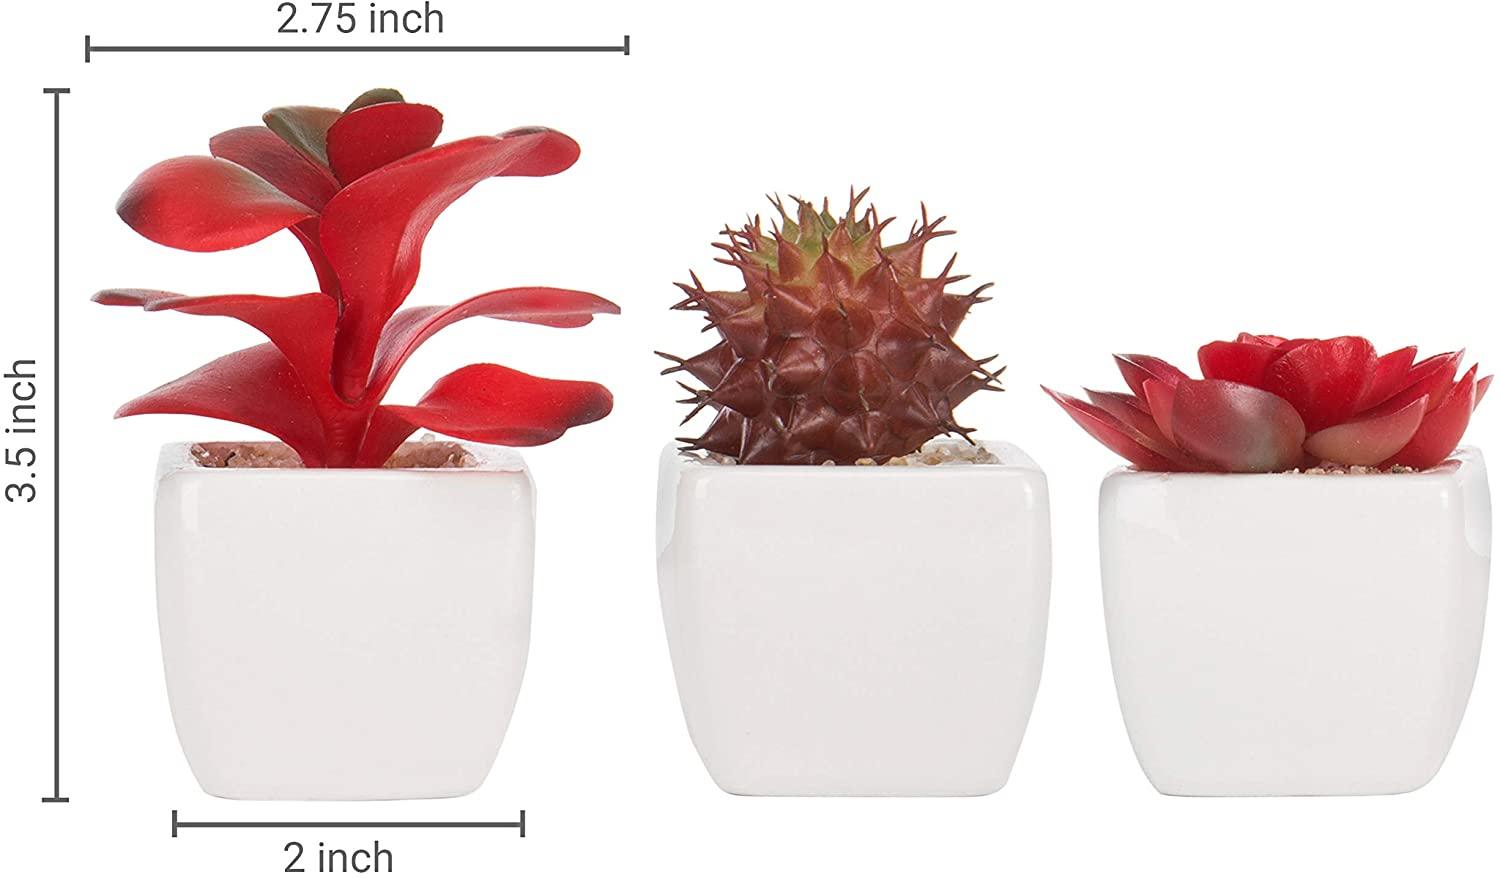 Set of 3 Miniature Red Artificial Succulent Plants in White Ceramic Pots - If you say i do